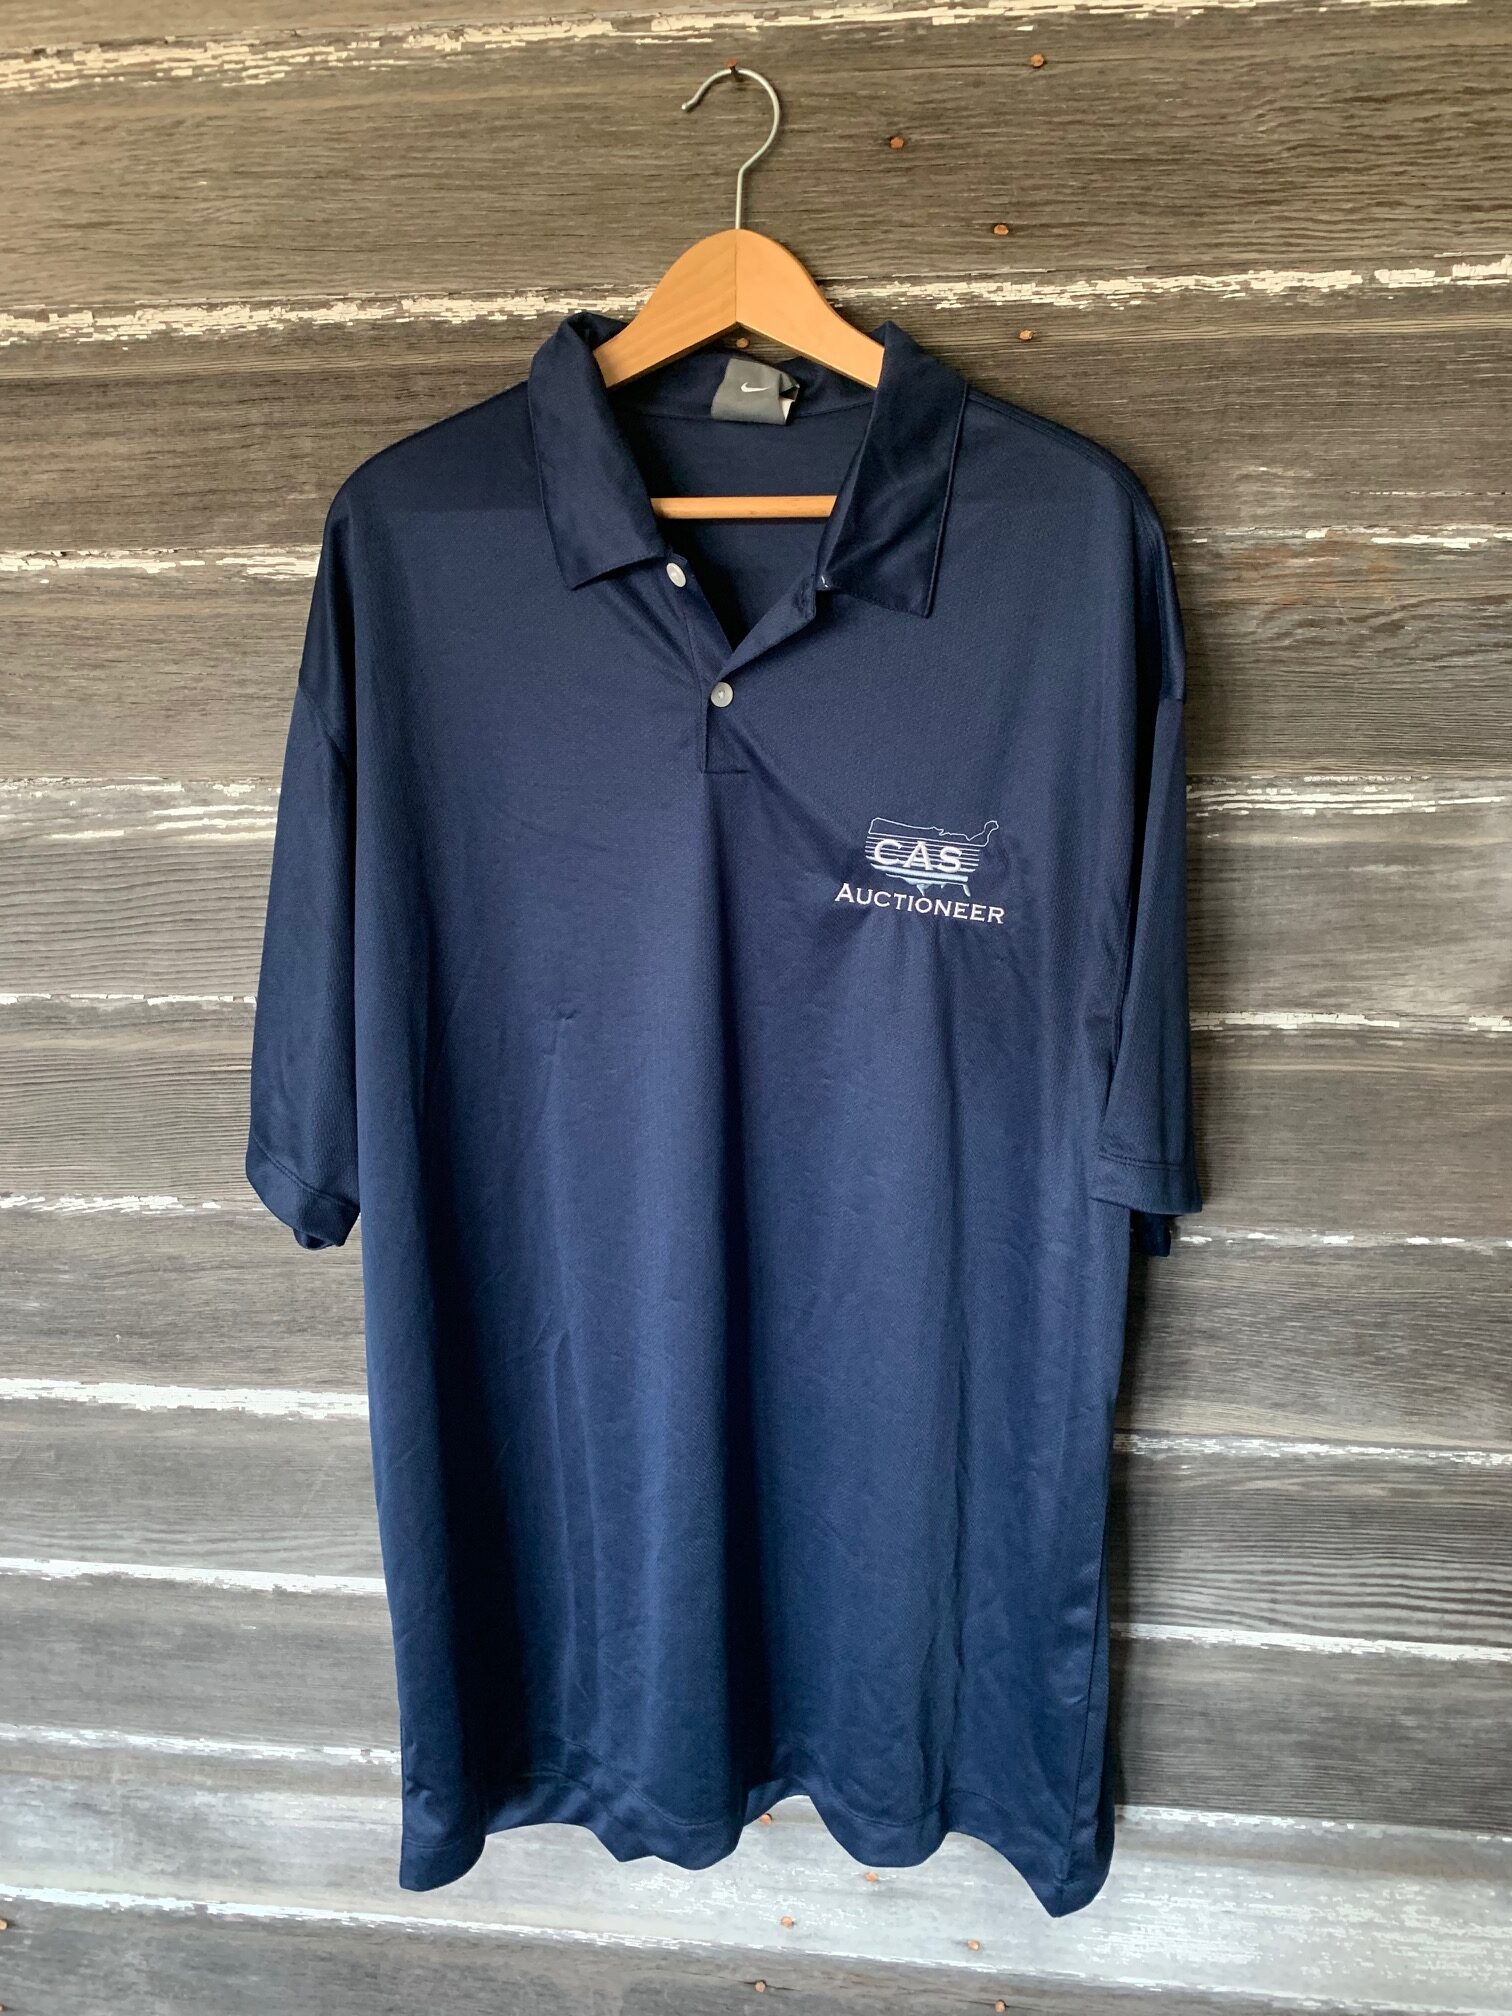 Mens navy polo - Continental Auctioneers School